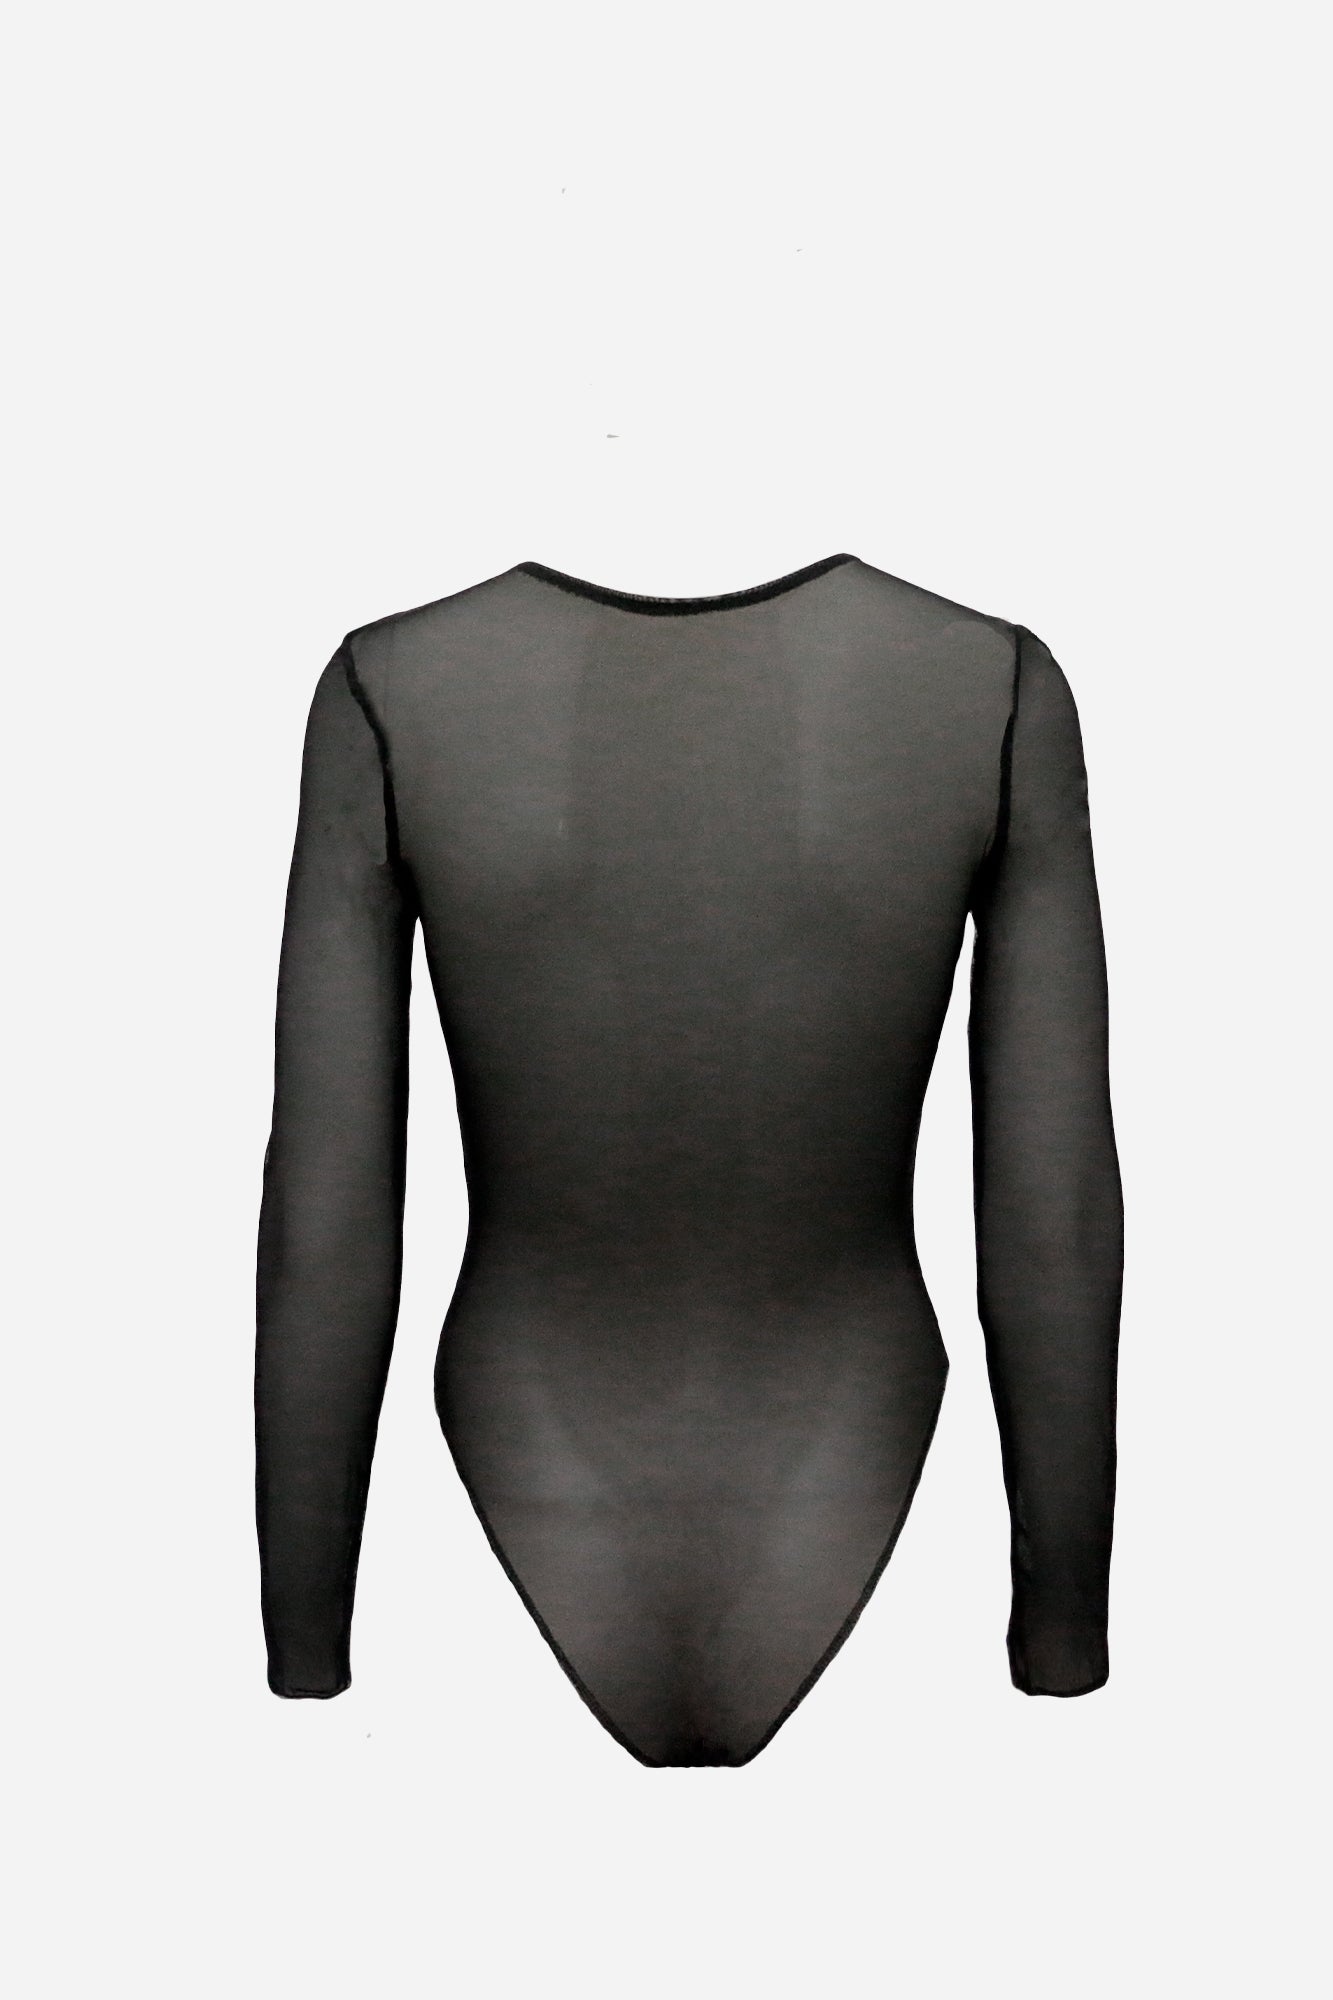 Body suit with halter neck